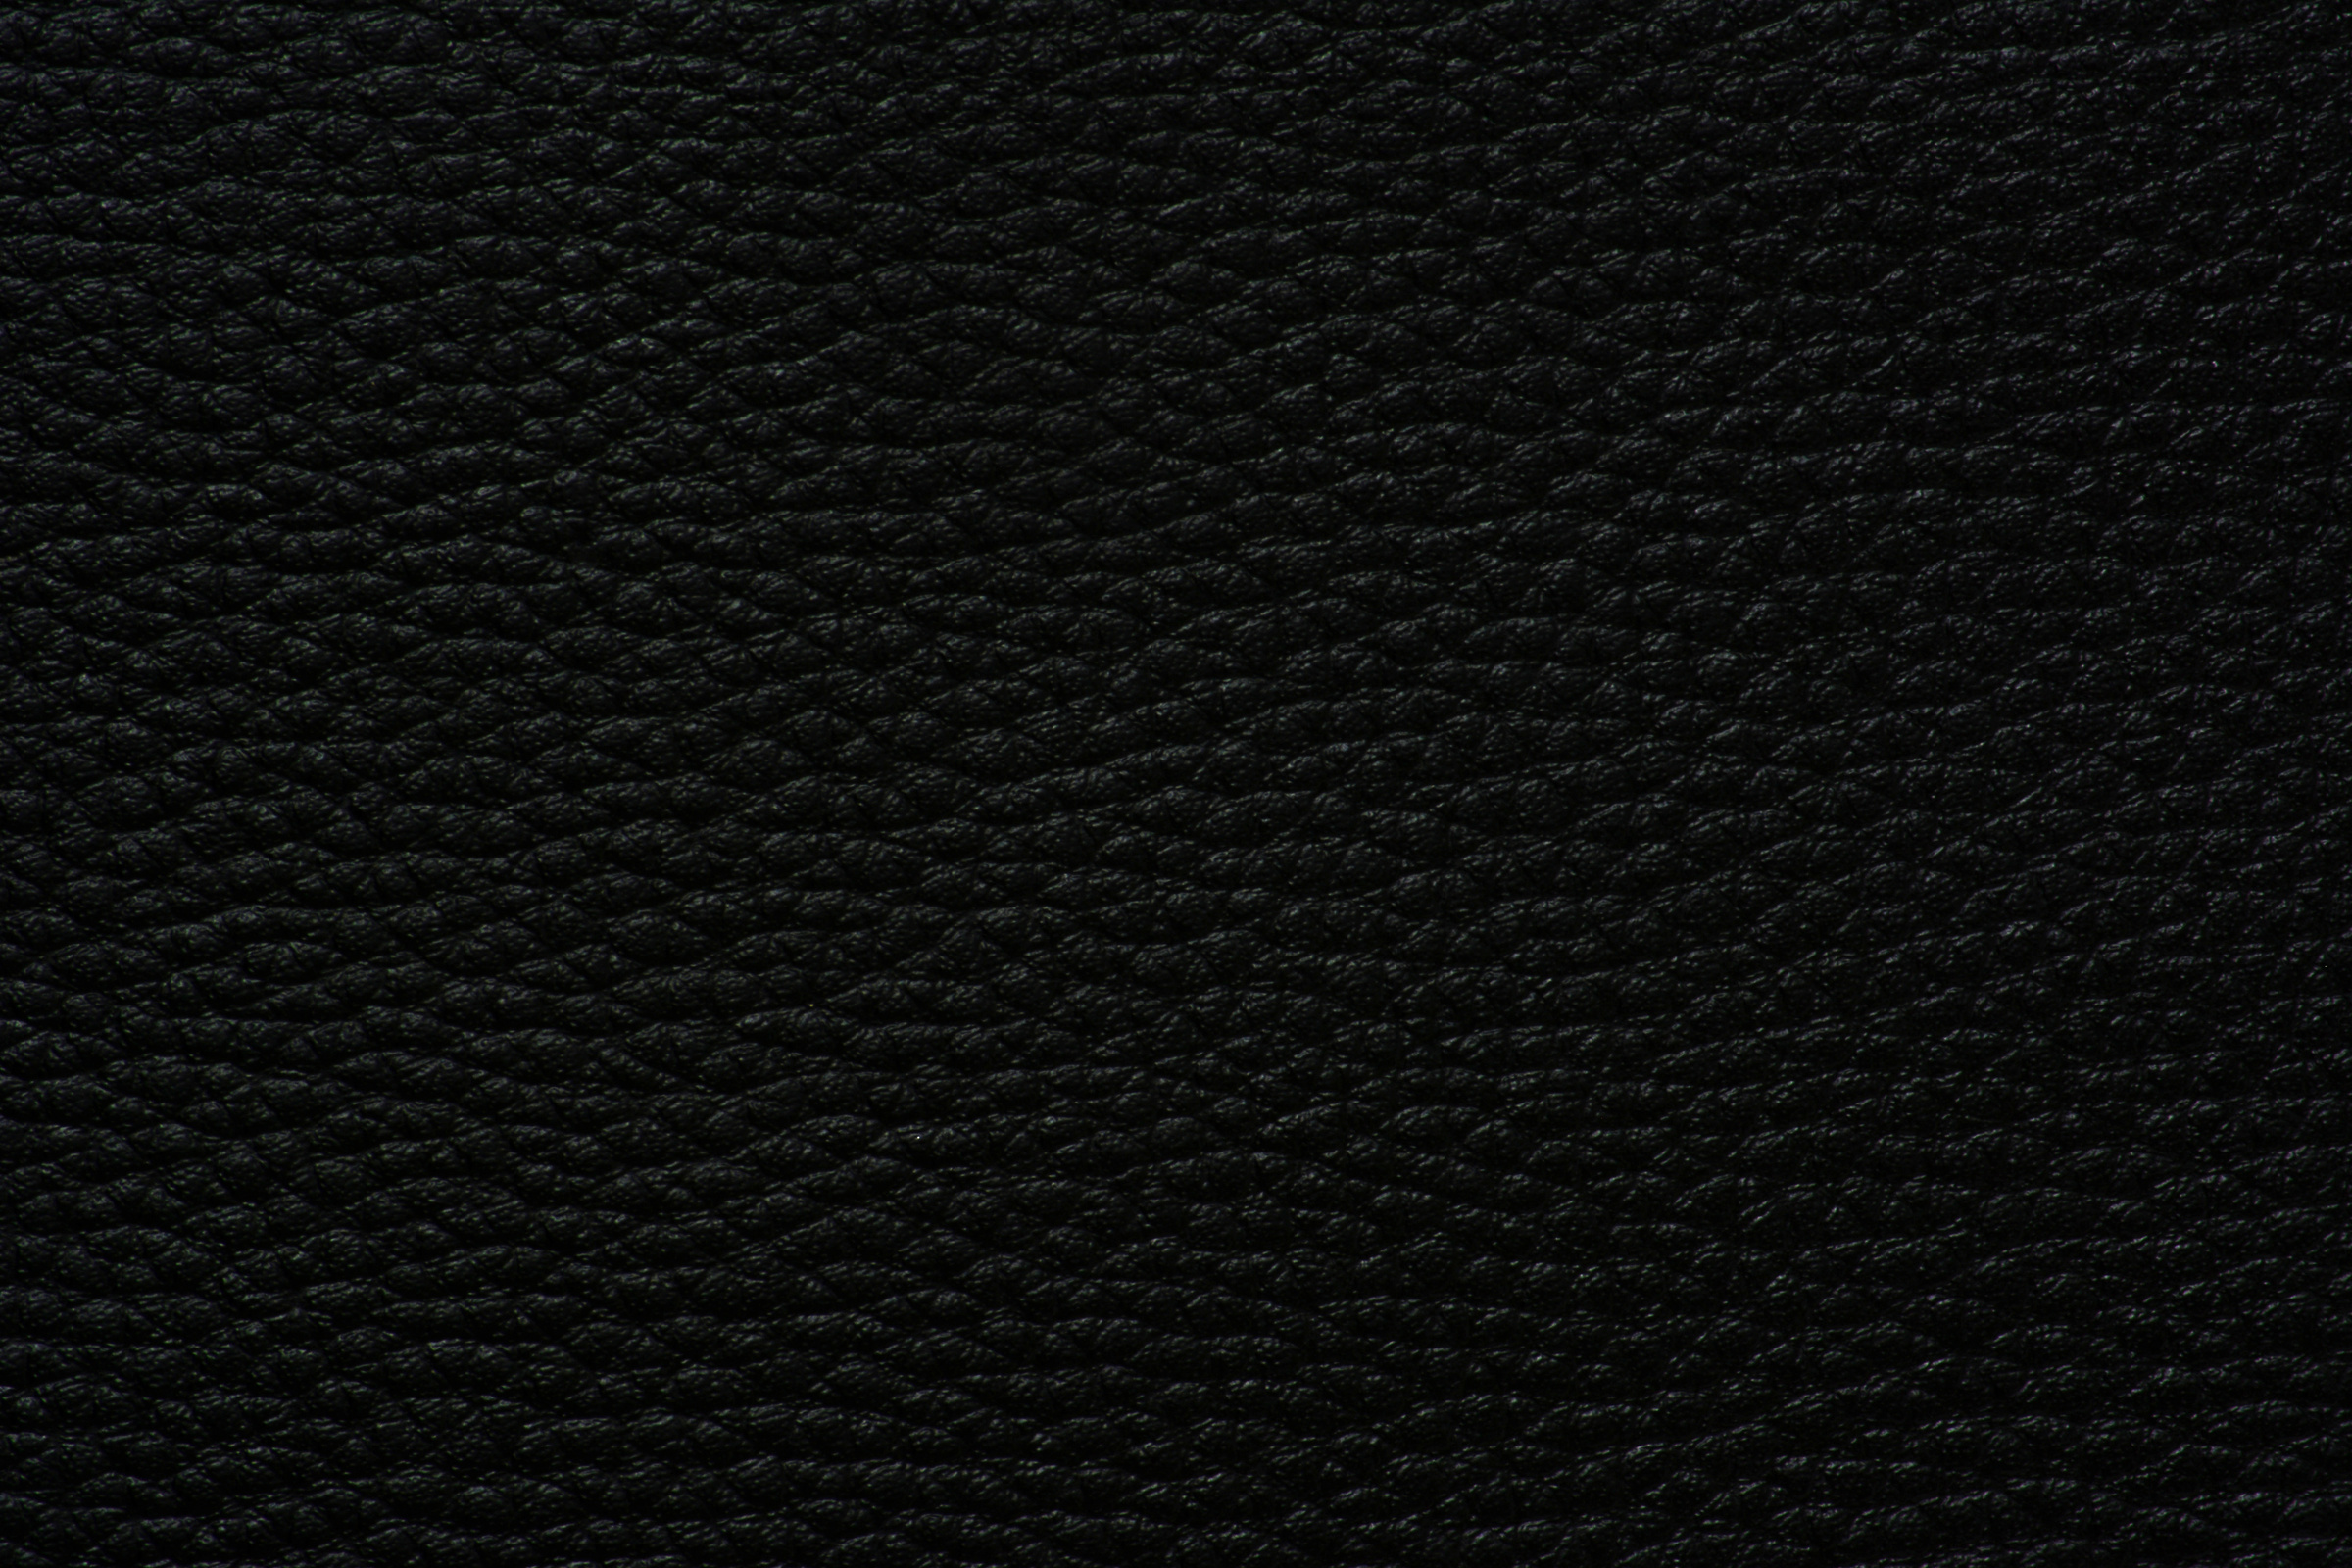 Black Leather Background Texture